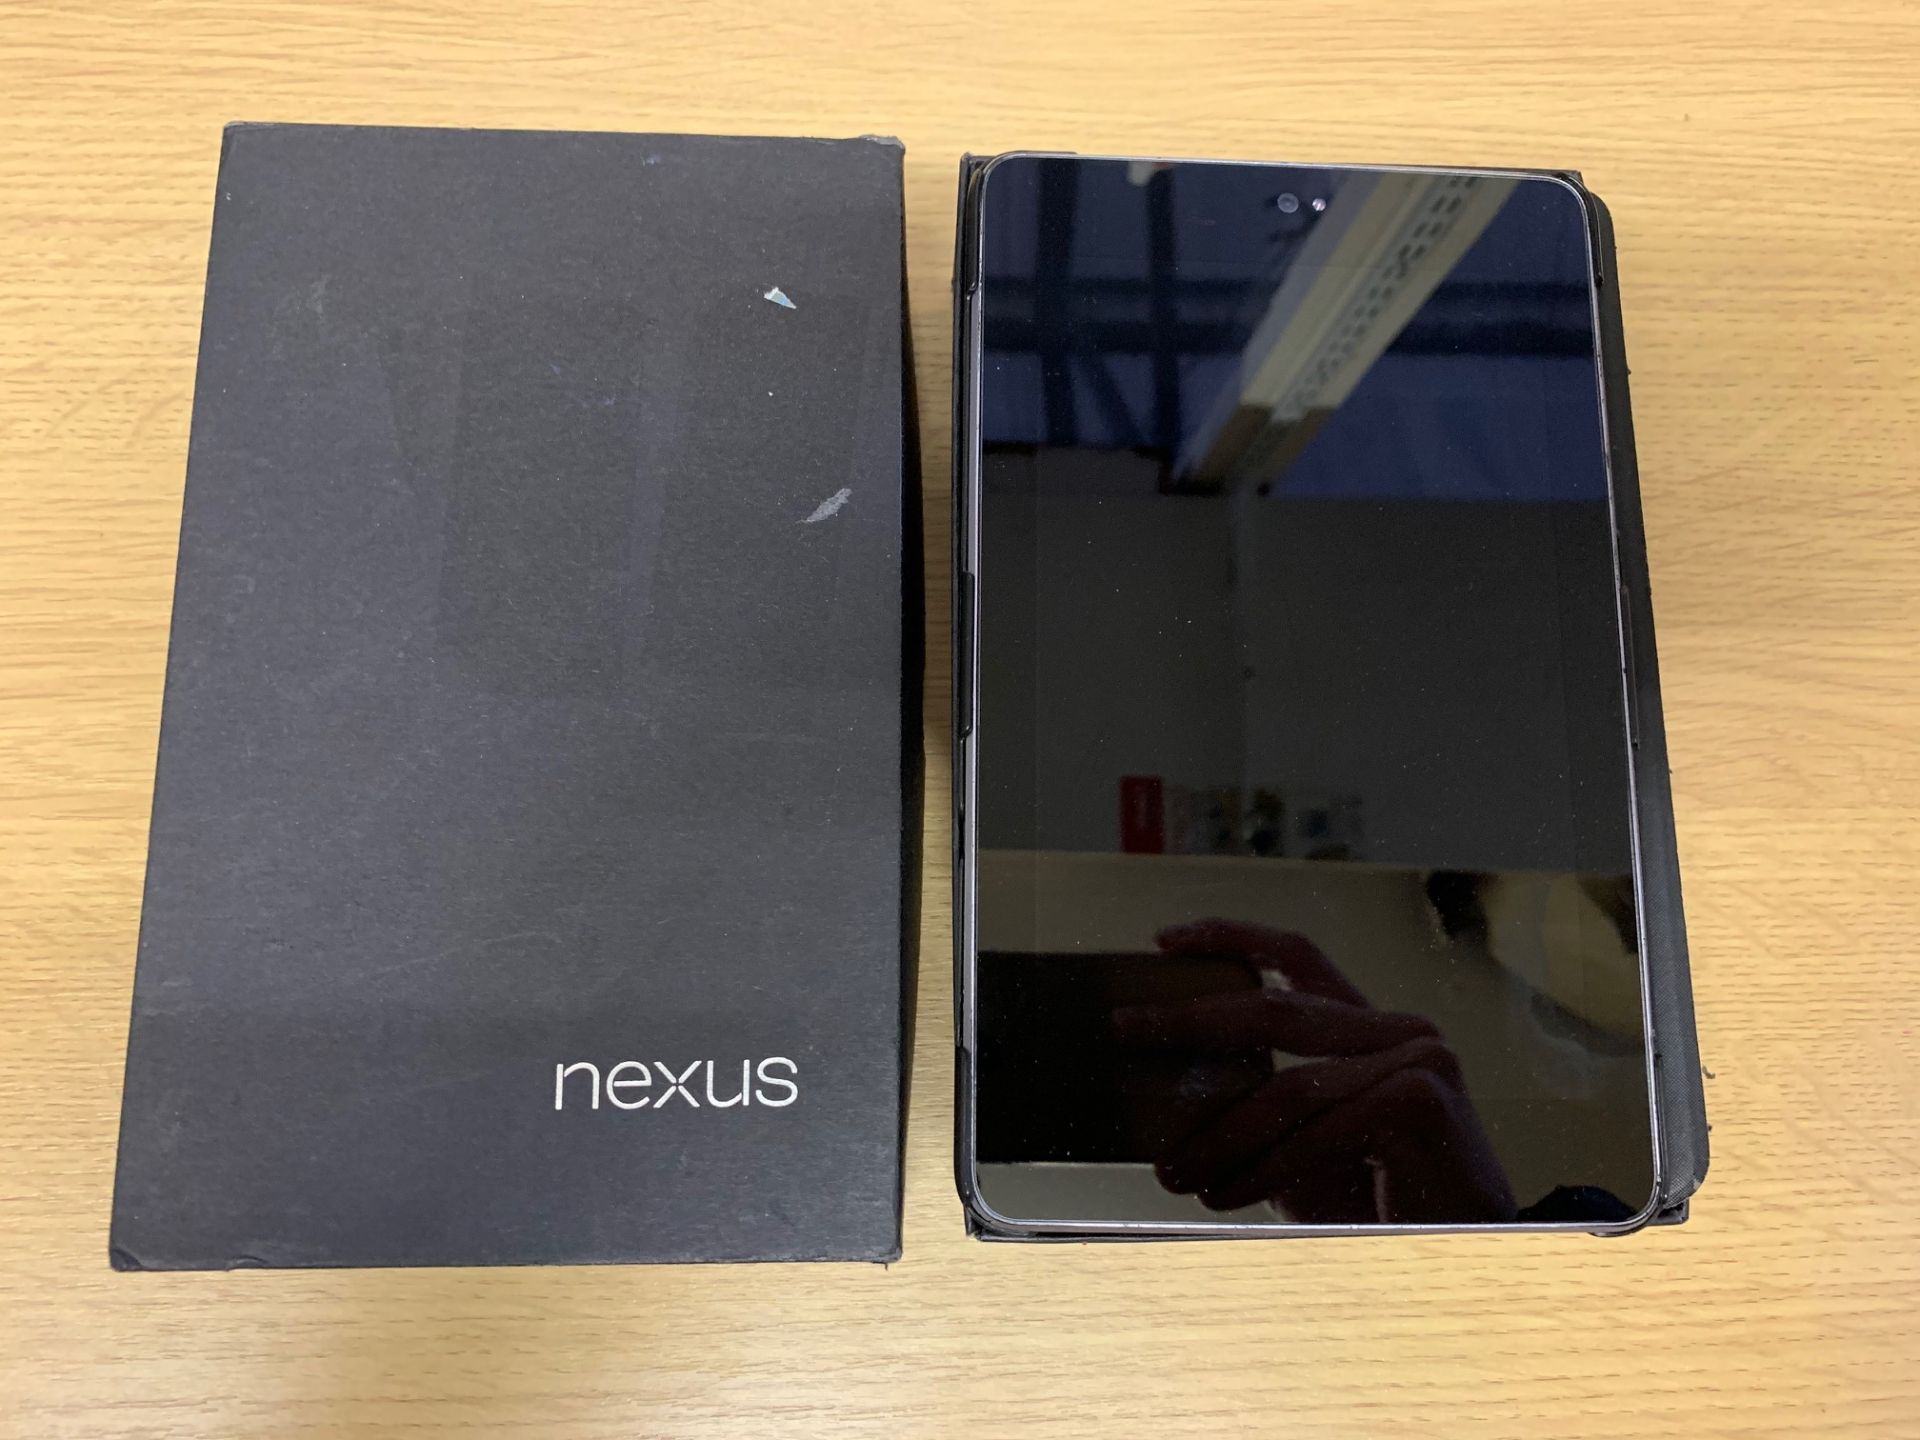 Google Nexus Tablet Boxed - 32GB, 7" Screen, Case & Charger - Image 2 of 3